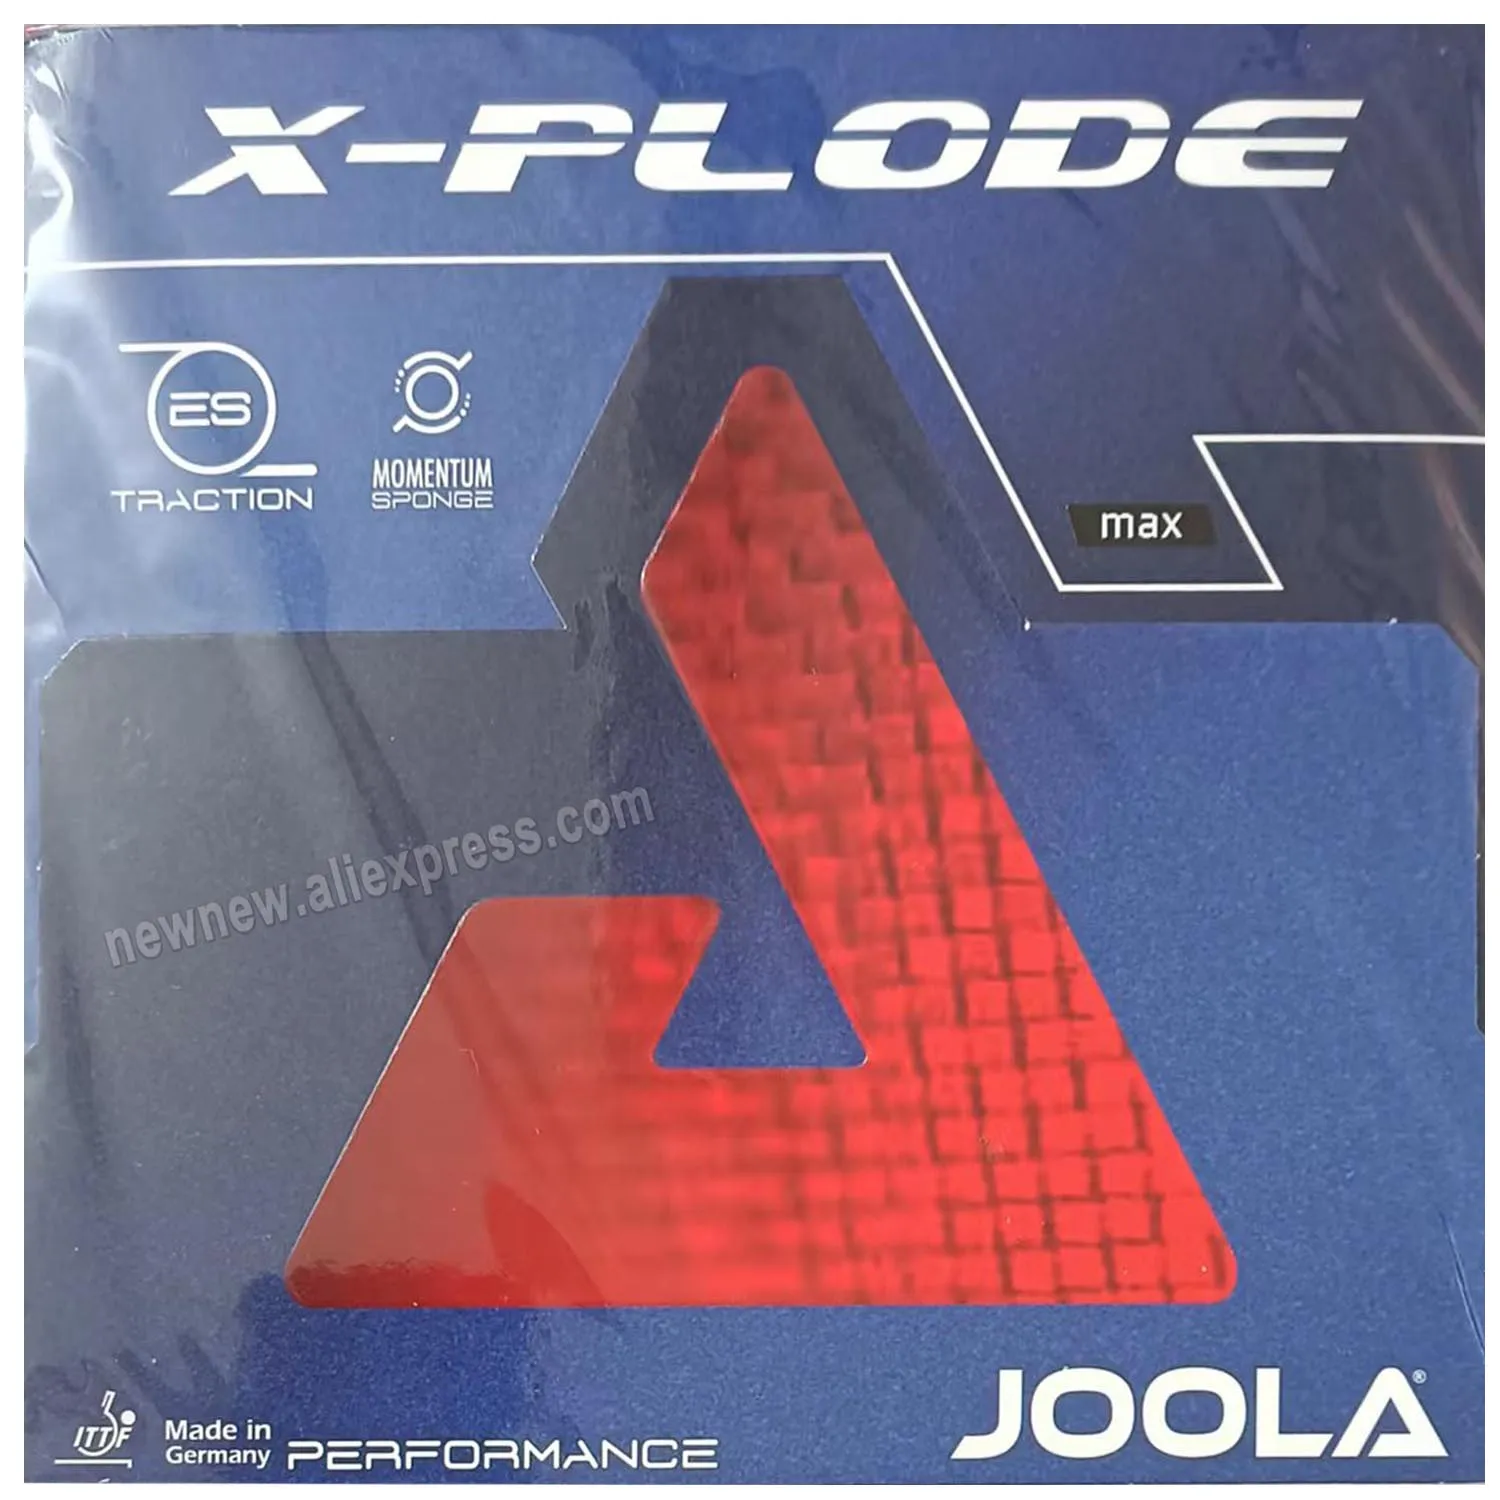 

Joola EXPRESS X-plode Speed & Spin Table Tennis Rubber Pimples In Ping Pong Rubber With Sponge